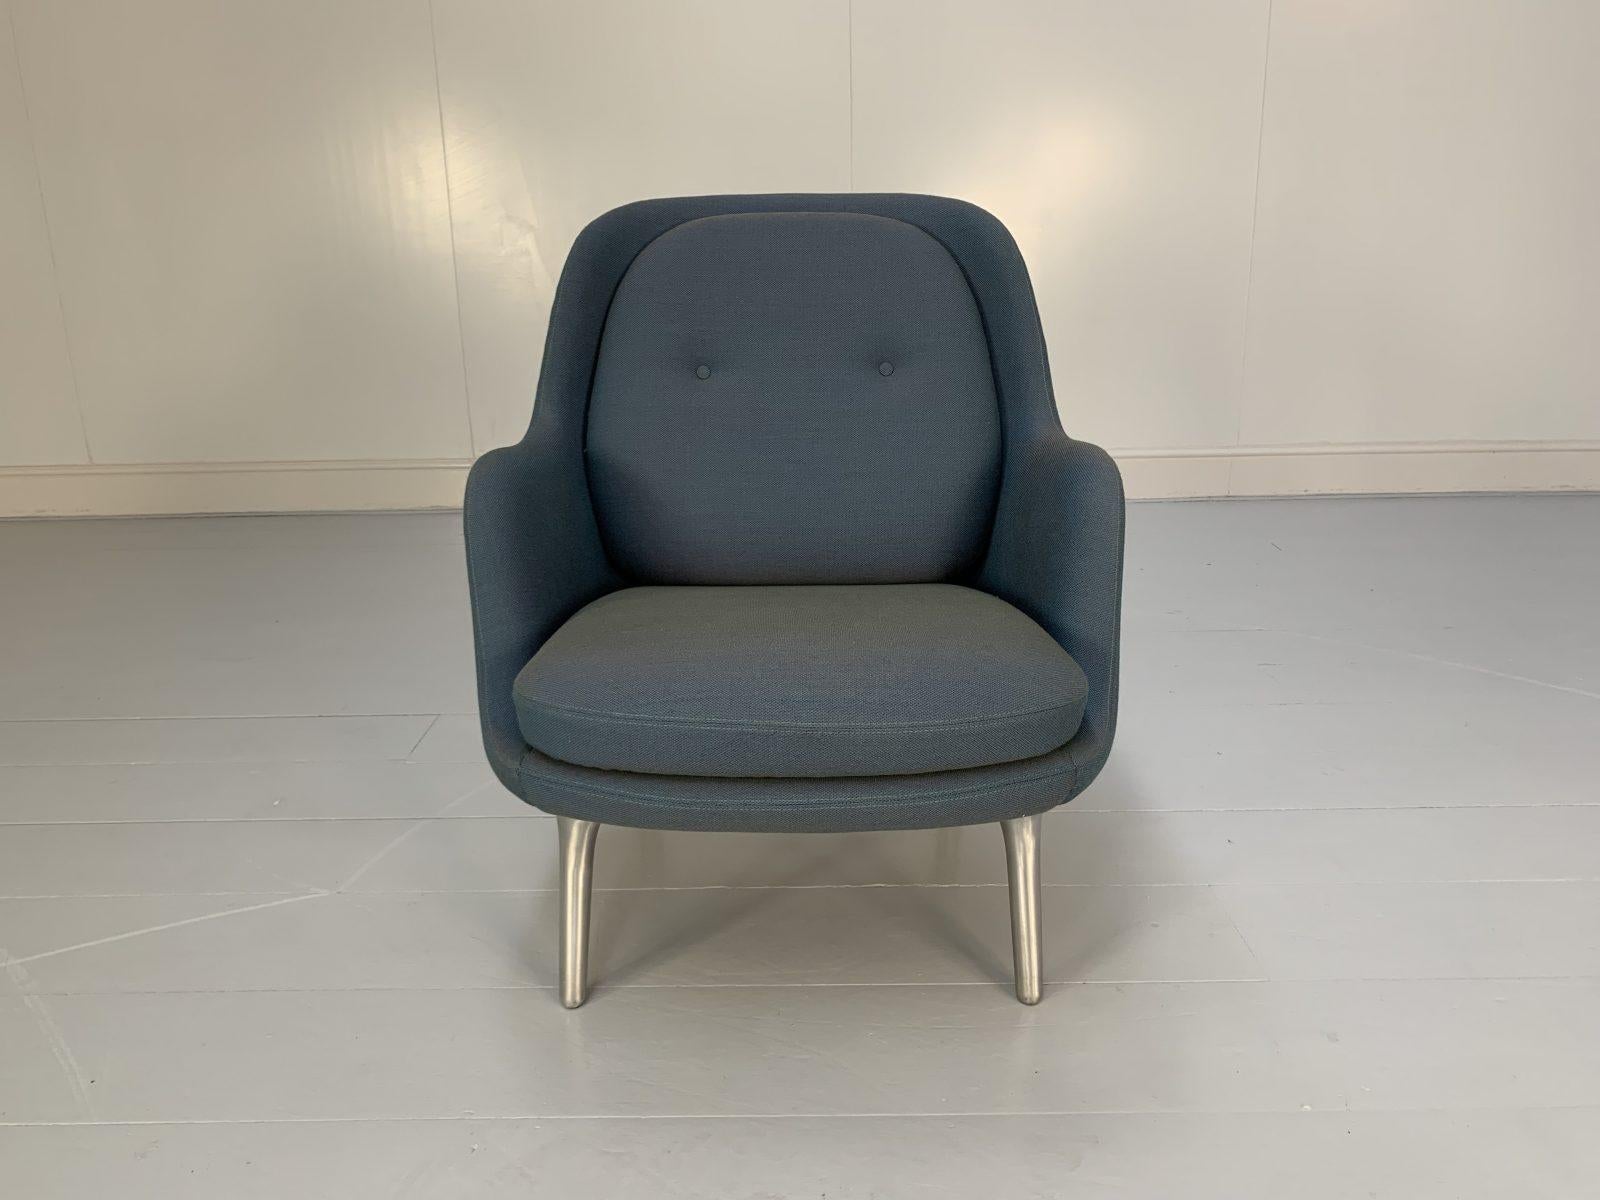 Fritz Hansen “Fri” Lounge Armchair in Blue Fabric In Good Condition For Sale In Barrowford, GB